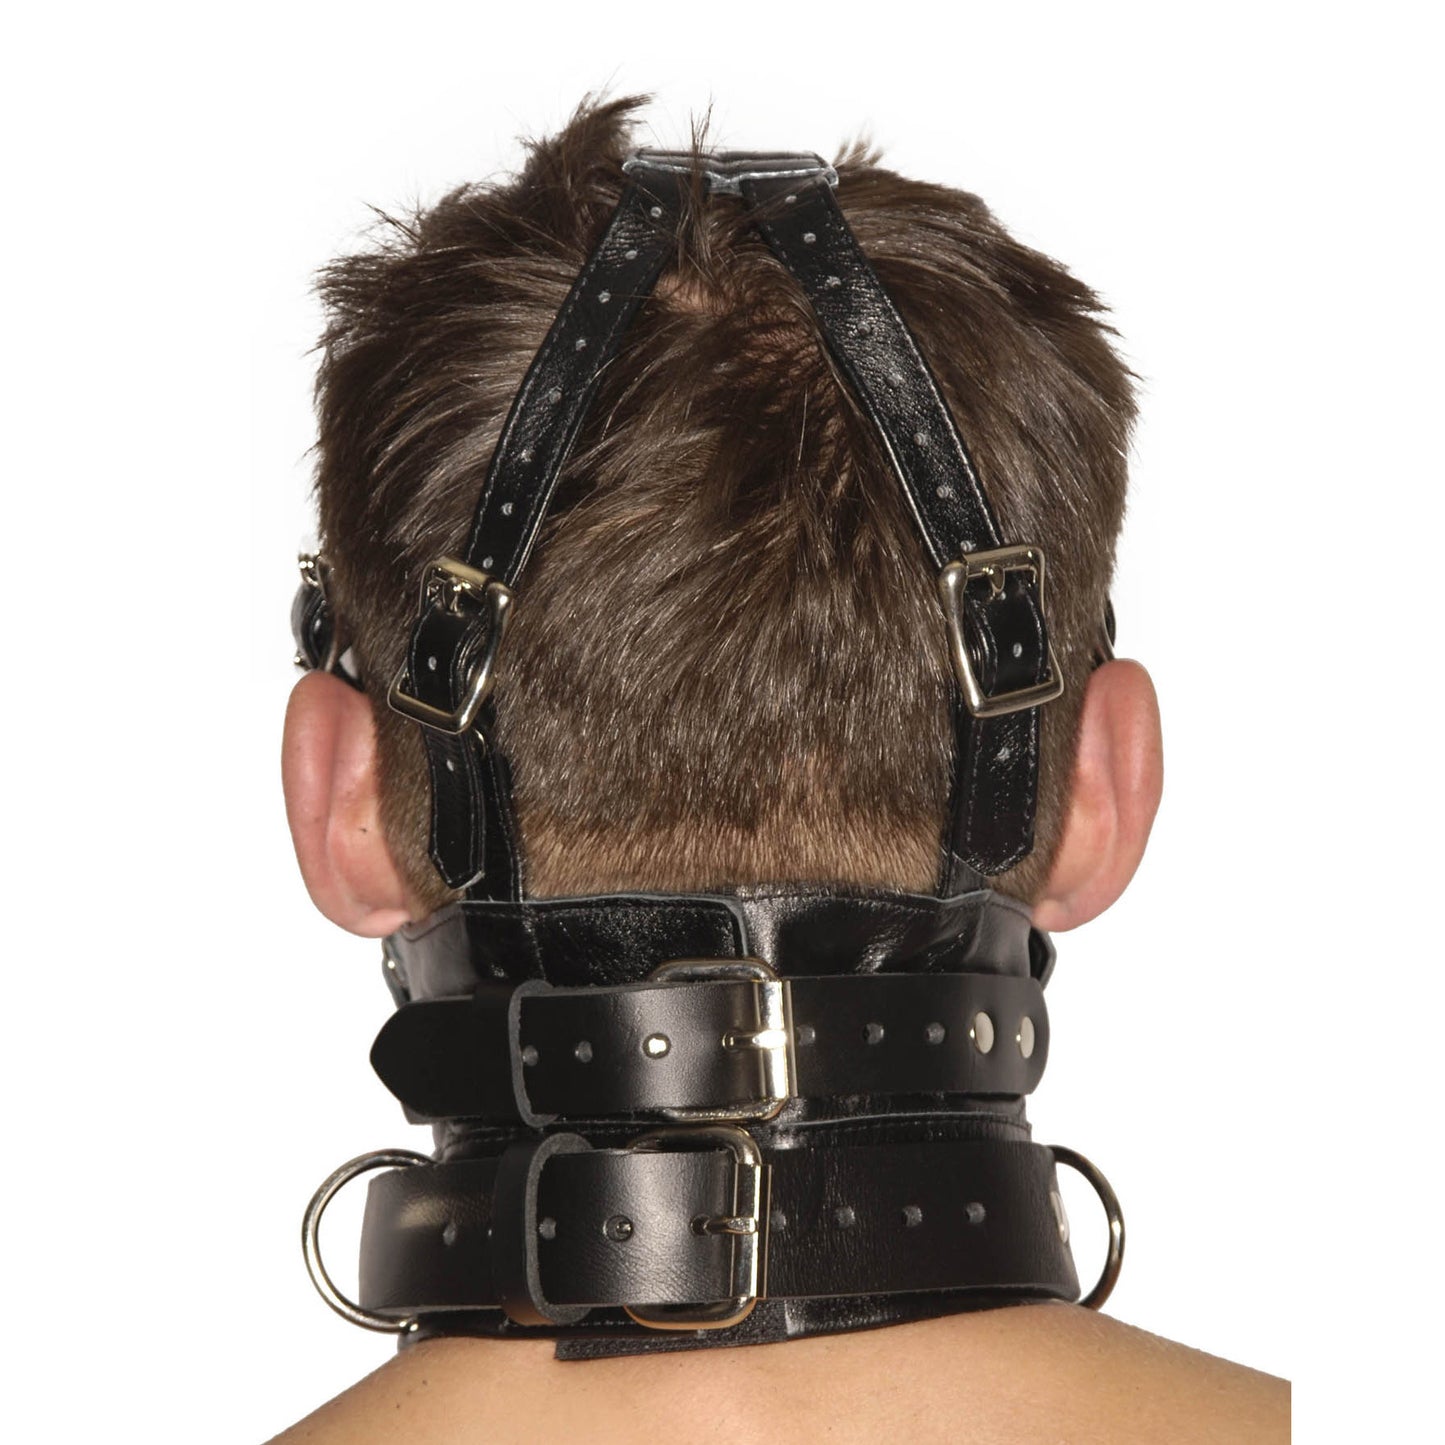 Strict Leather Premium Muzzle with Blindfold and Gags - UABDSM